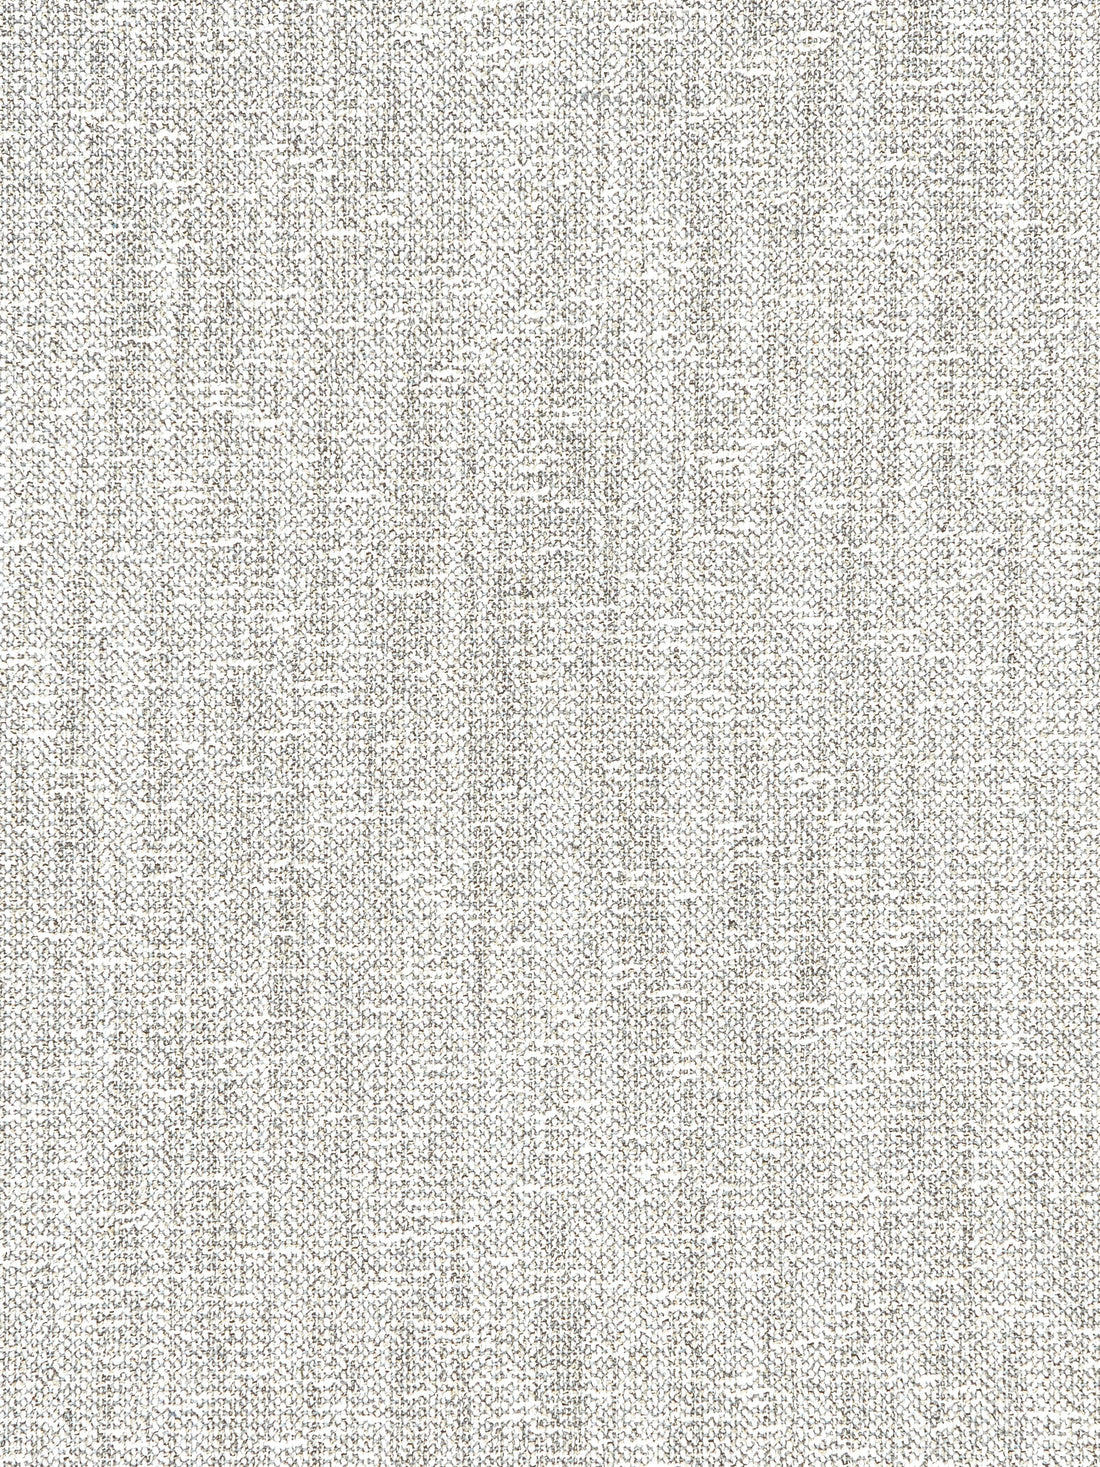 Haiku Weave fabric in flint color - pattern number SC 000327240 - by Scalamandre in the Scalamandre Fabrics Book 1 collection